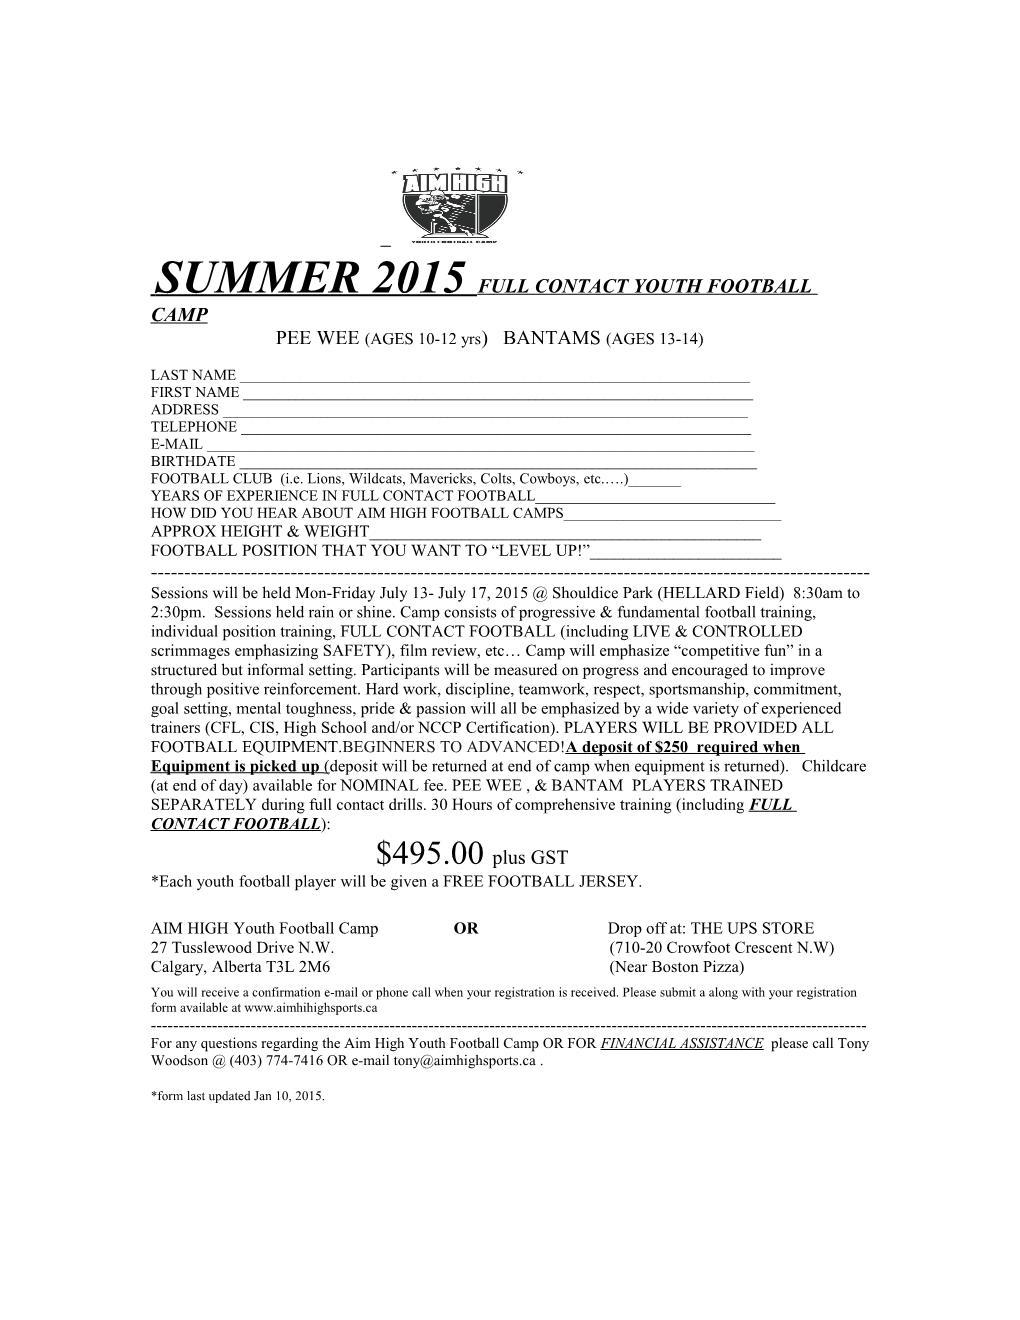 Summer 2015Full Contact Youth Football Camp